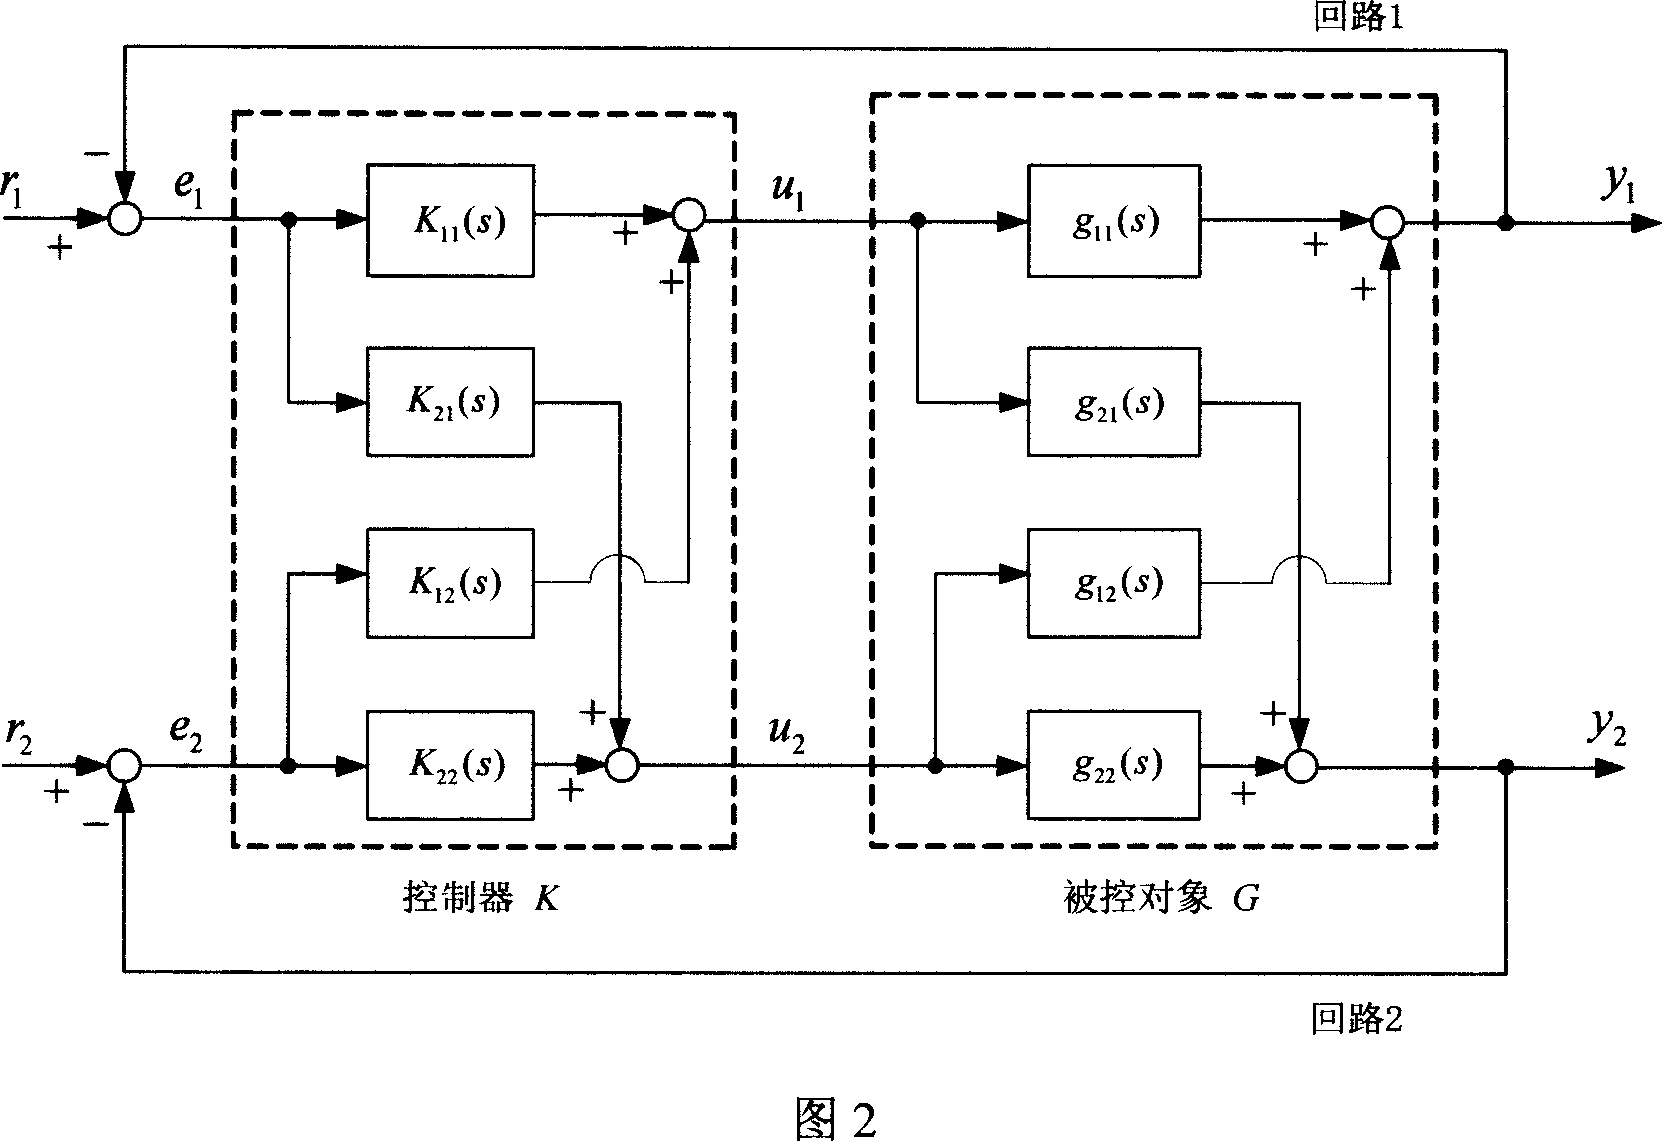 Uncoupling control method for double-inputting and double-outputting system